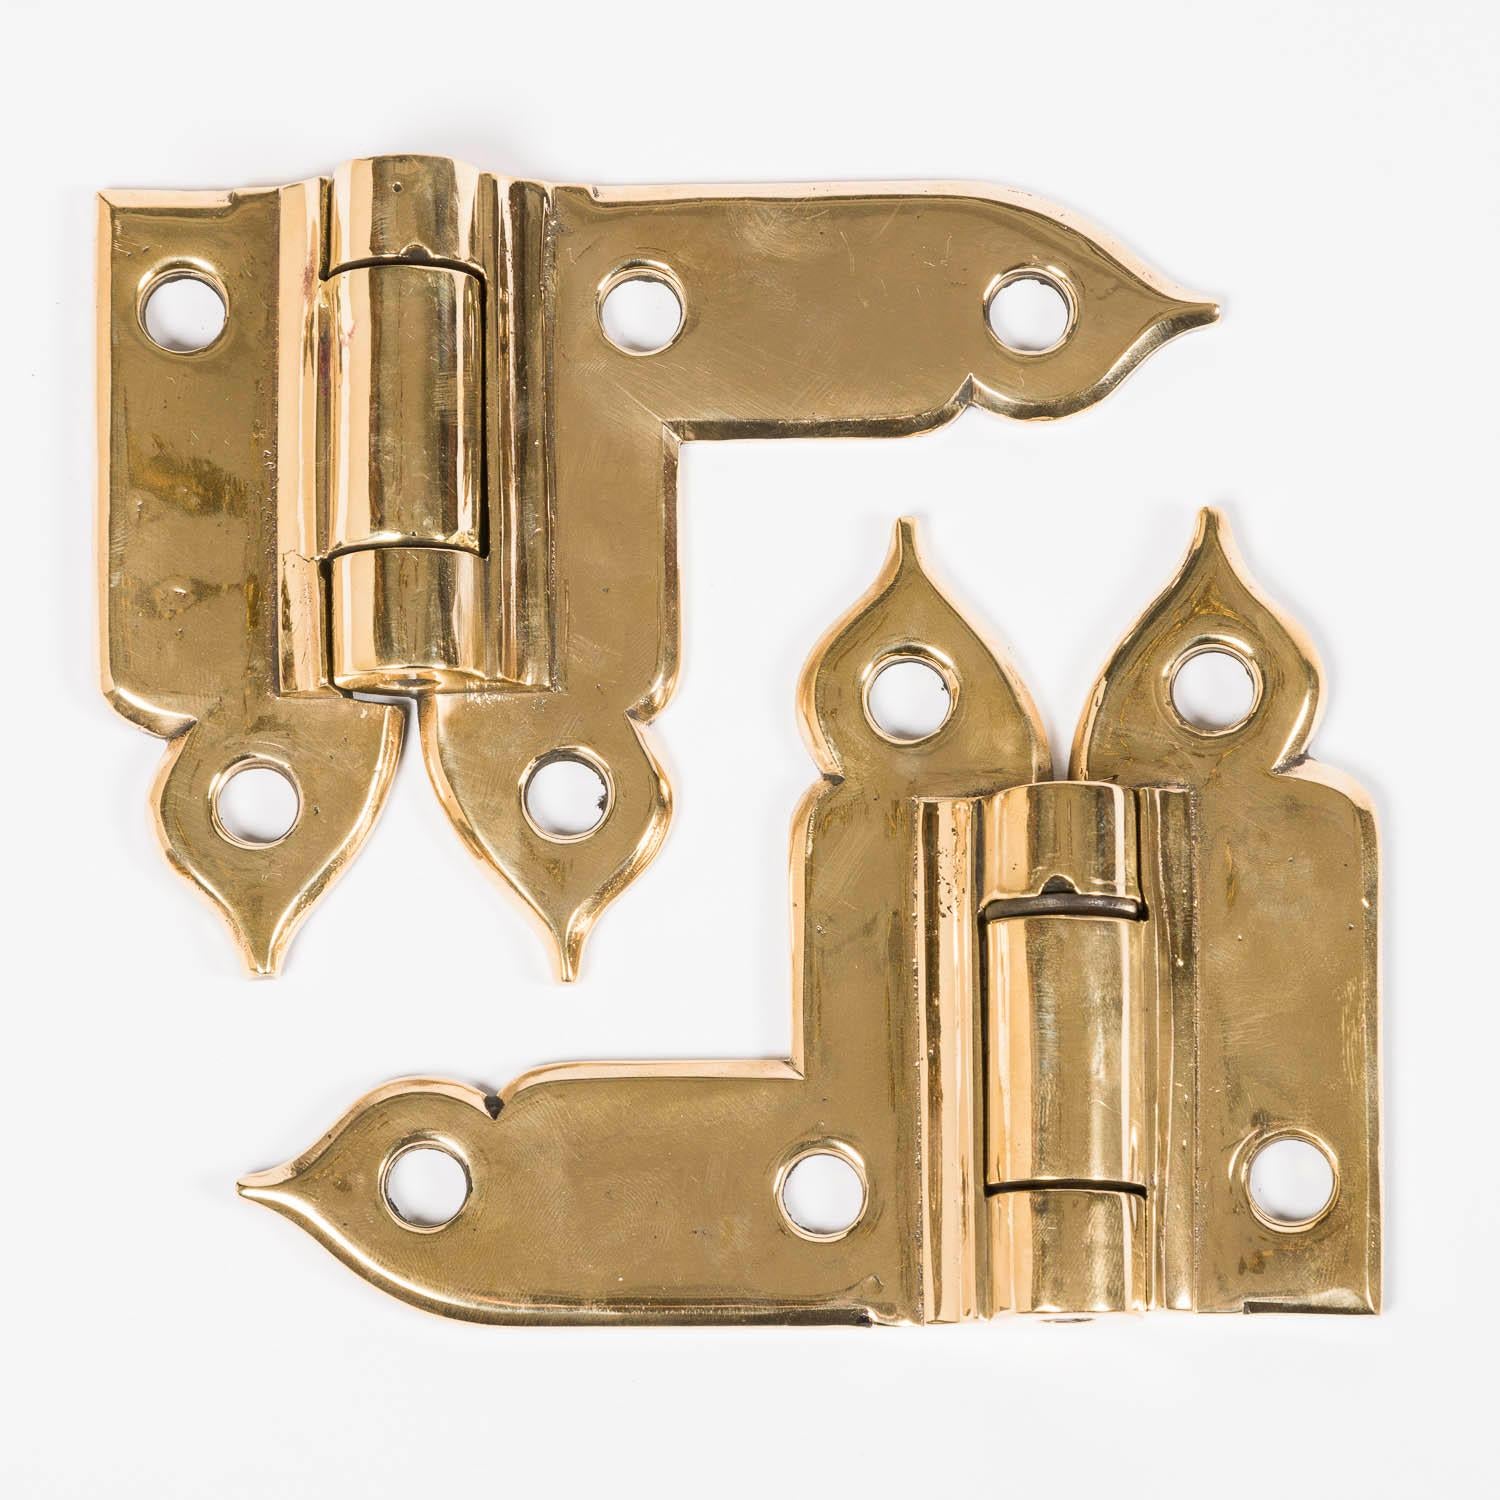 Gothic Revival A pair of late 19th century brass hinges in the Gothic style. For Sale